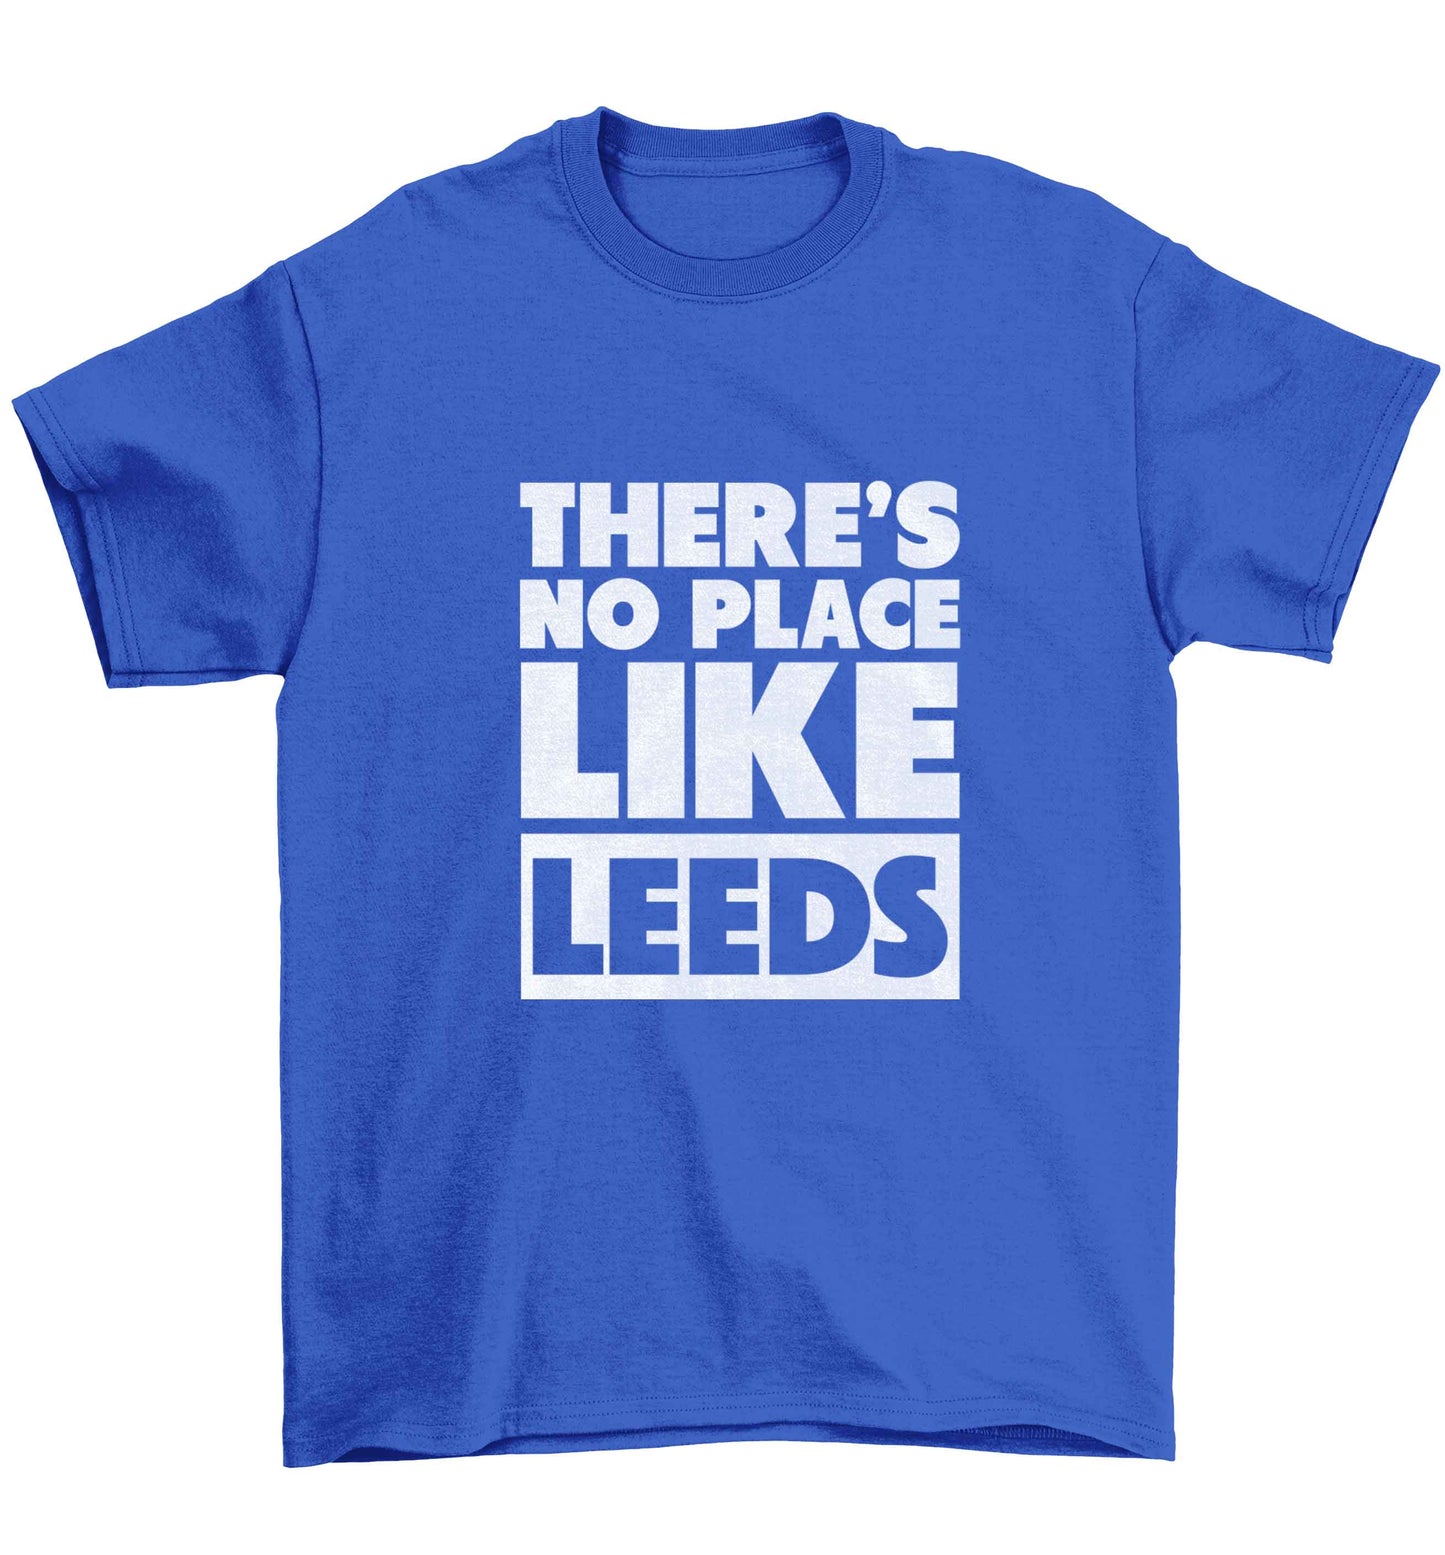 There's no place like Leeds Children's blue Tshirt 12-13 Years